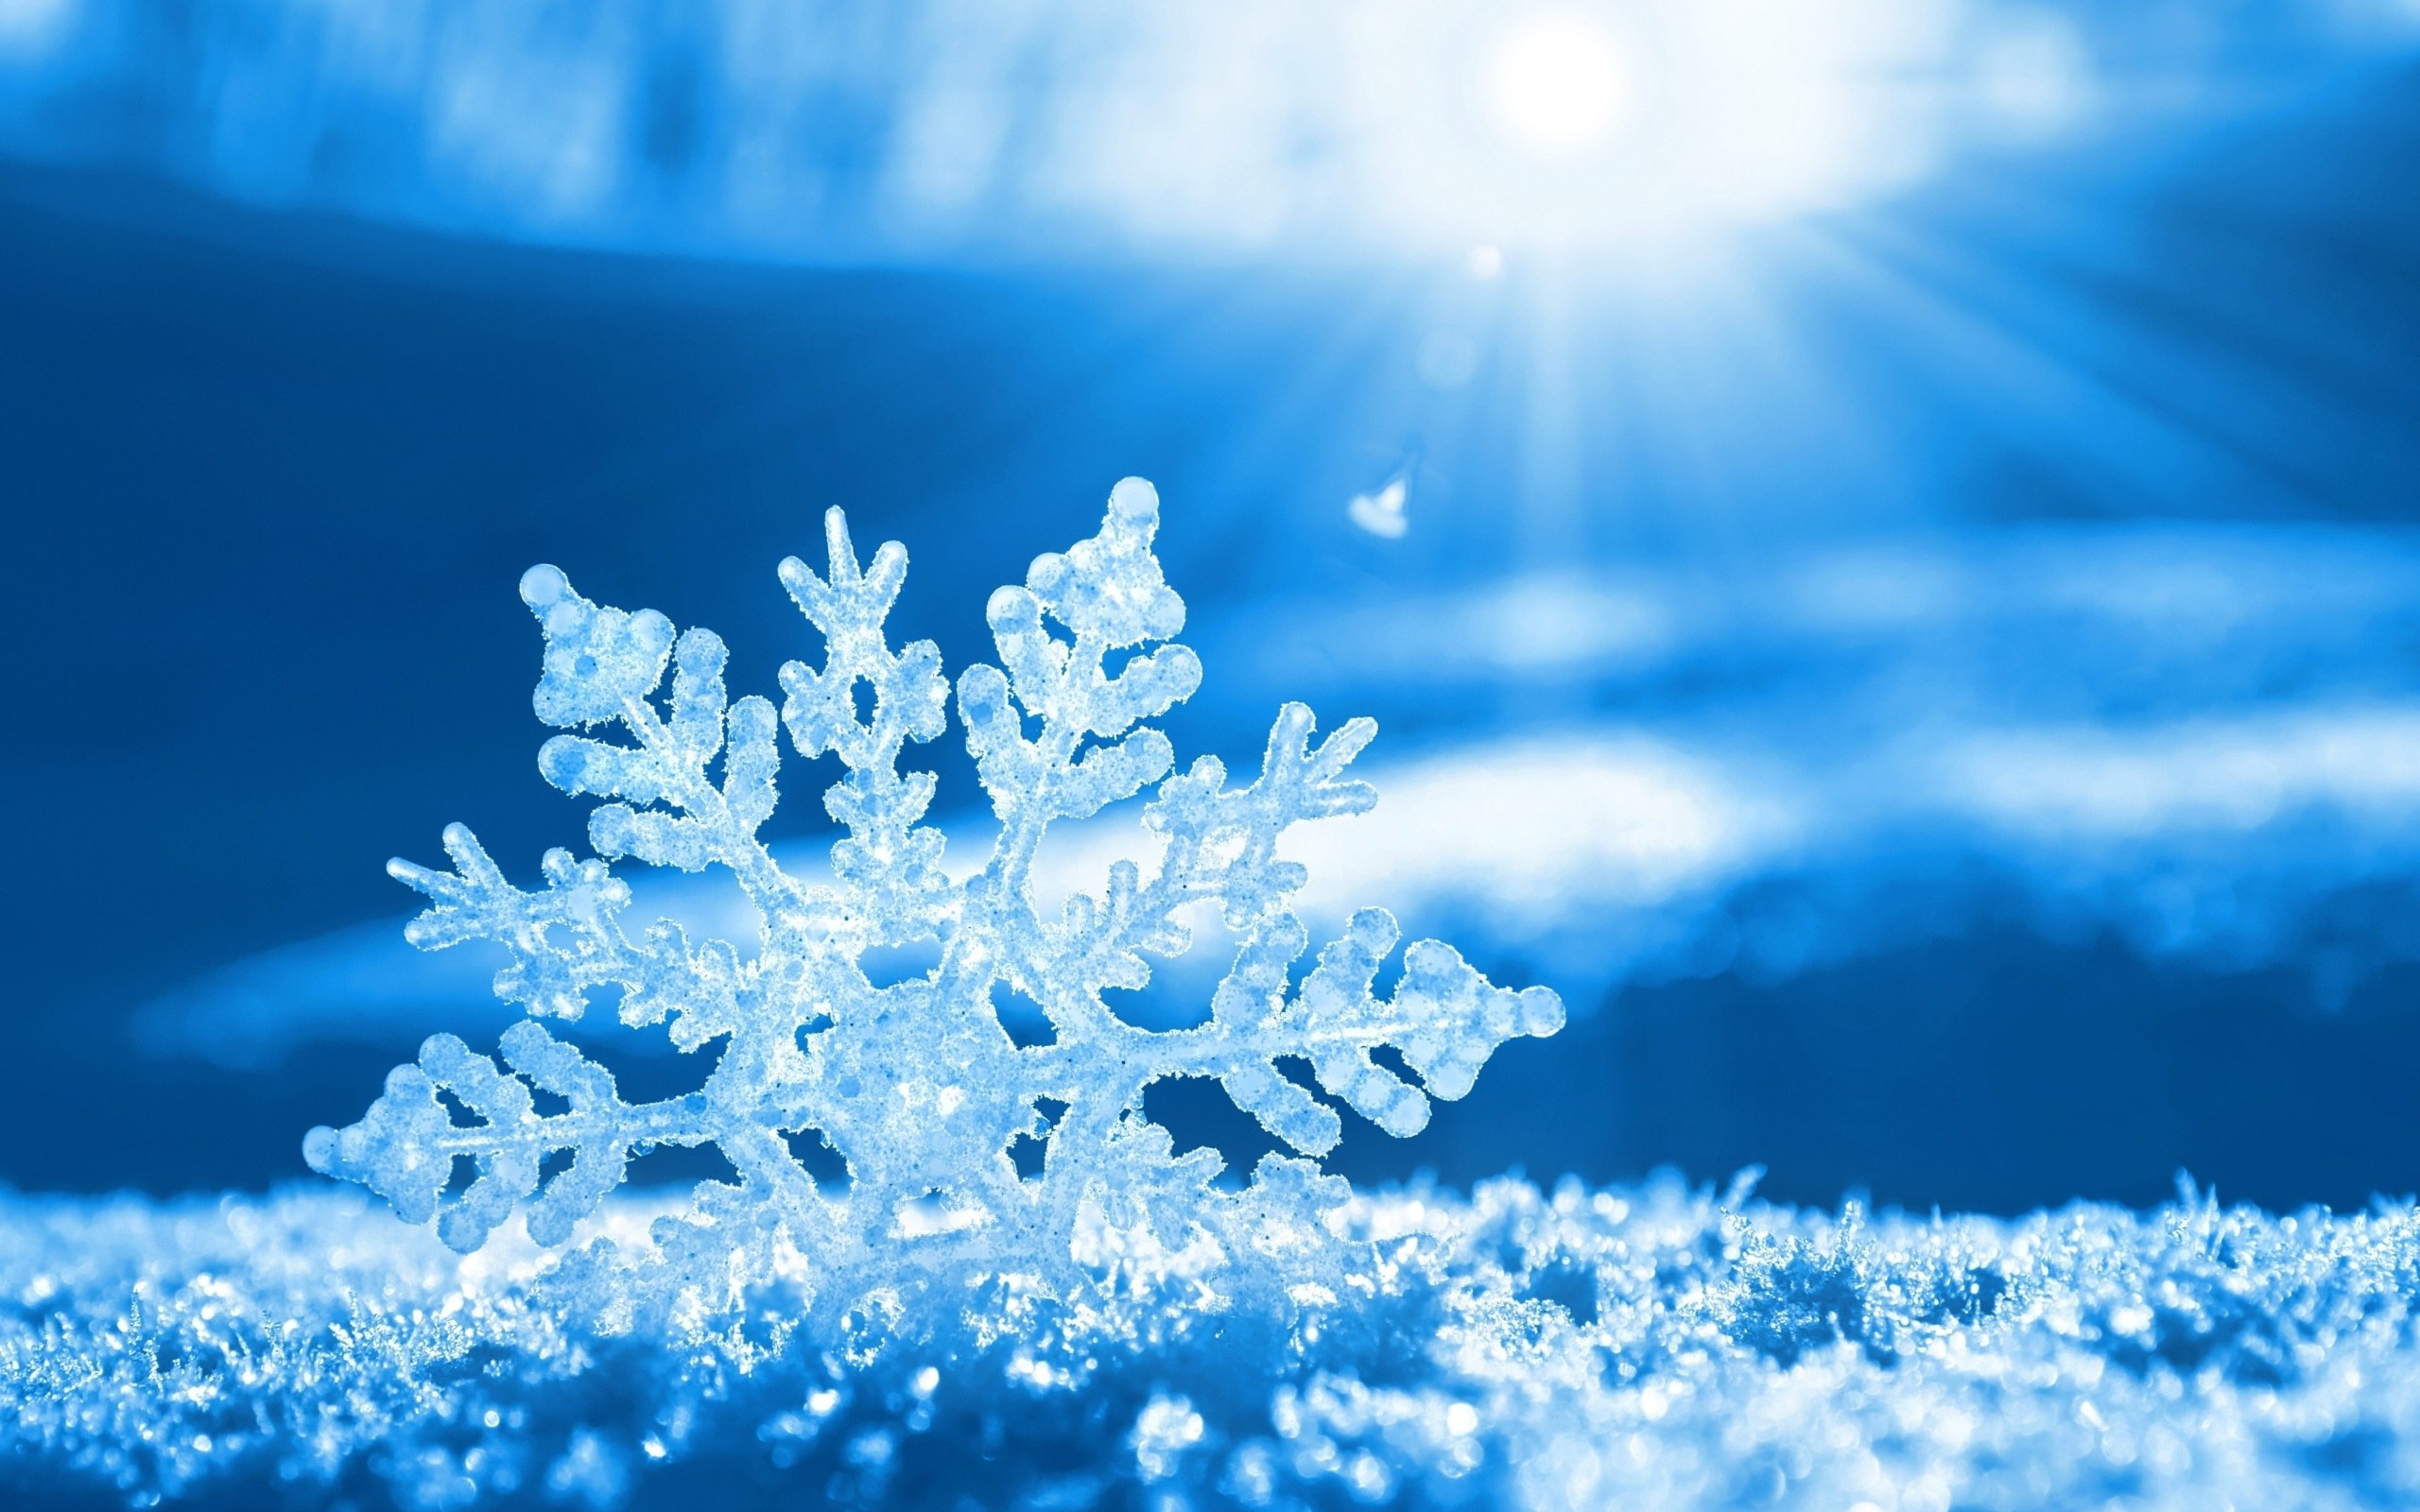 Snowflake has appeared in time for winter. This cloud data warehousing and analytics company revealed its product for the first time this week, ...